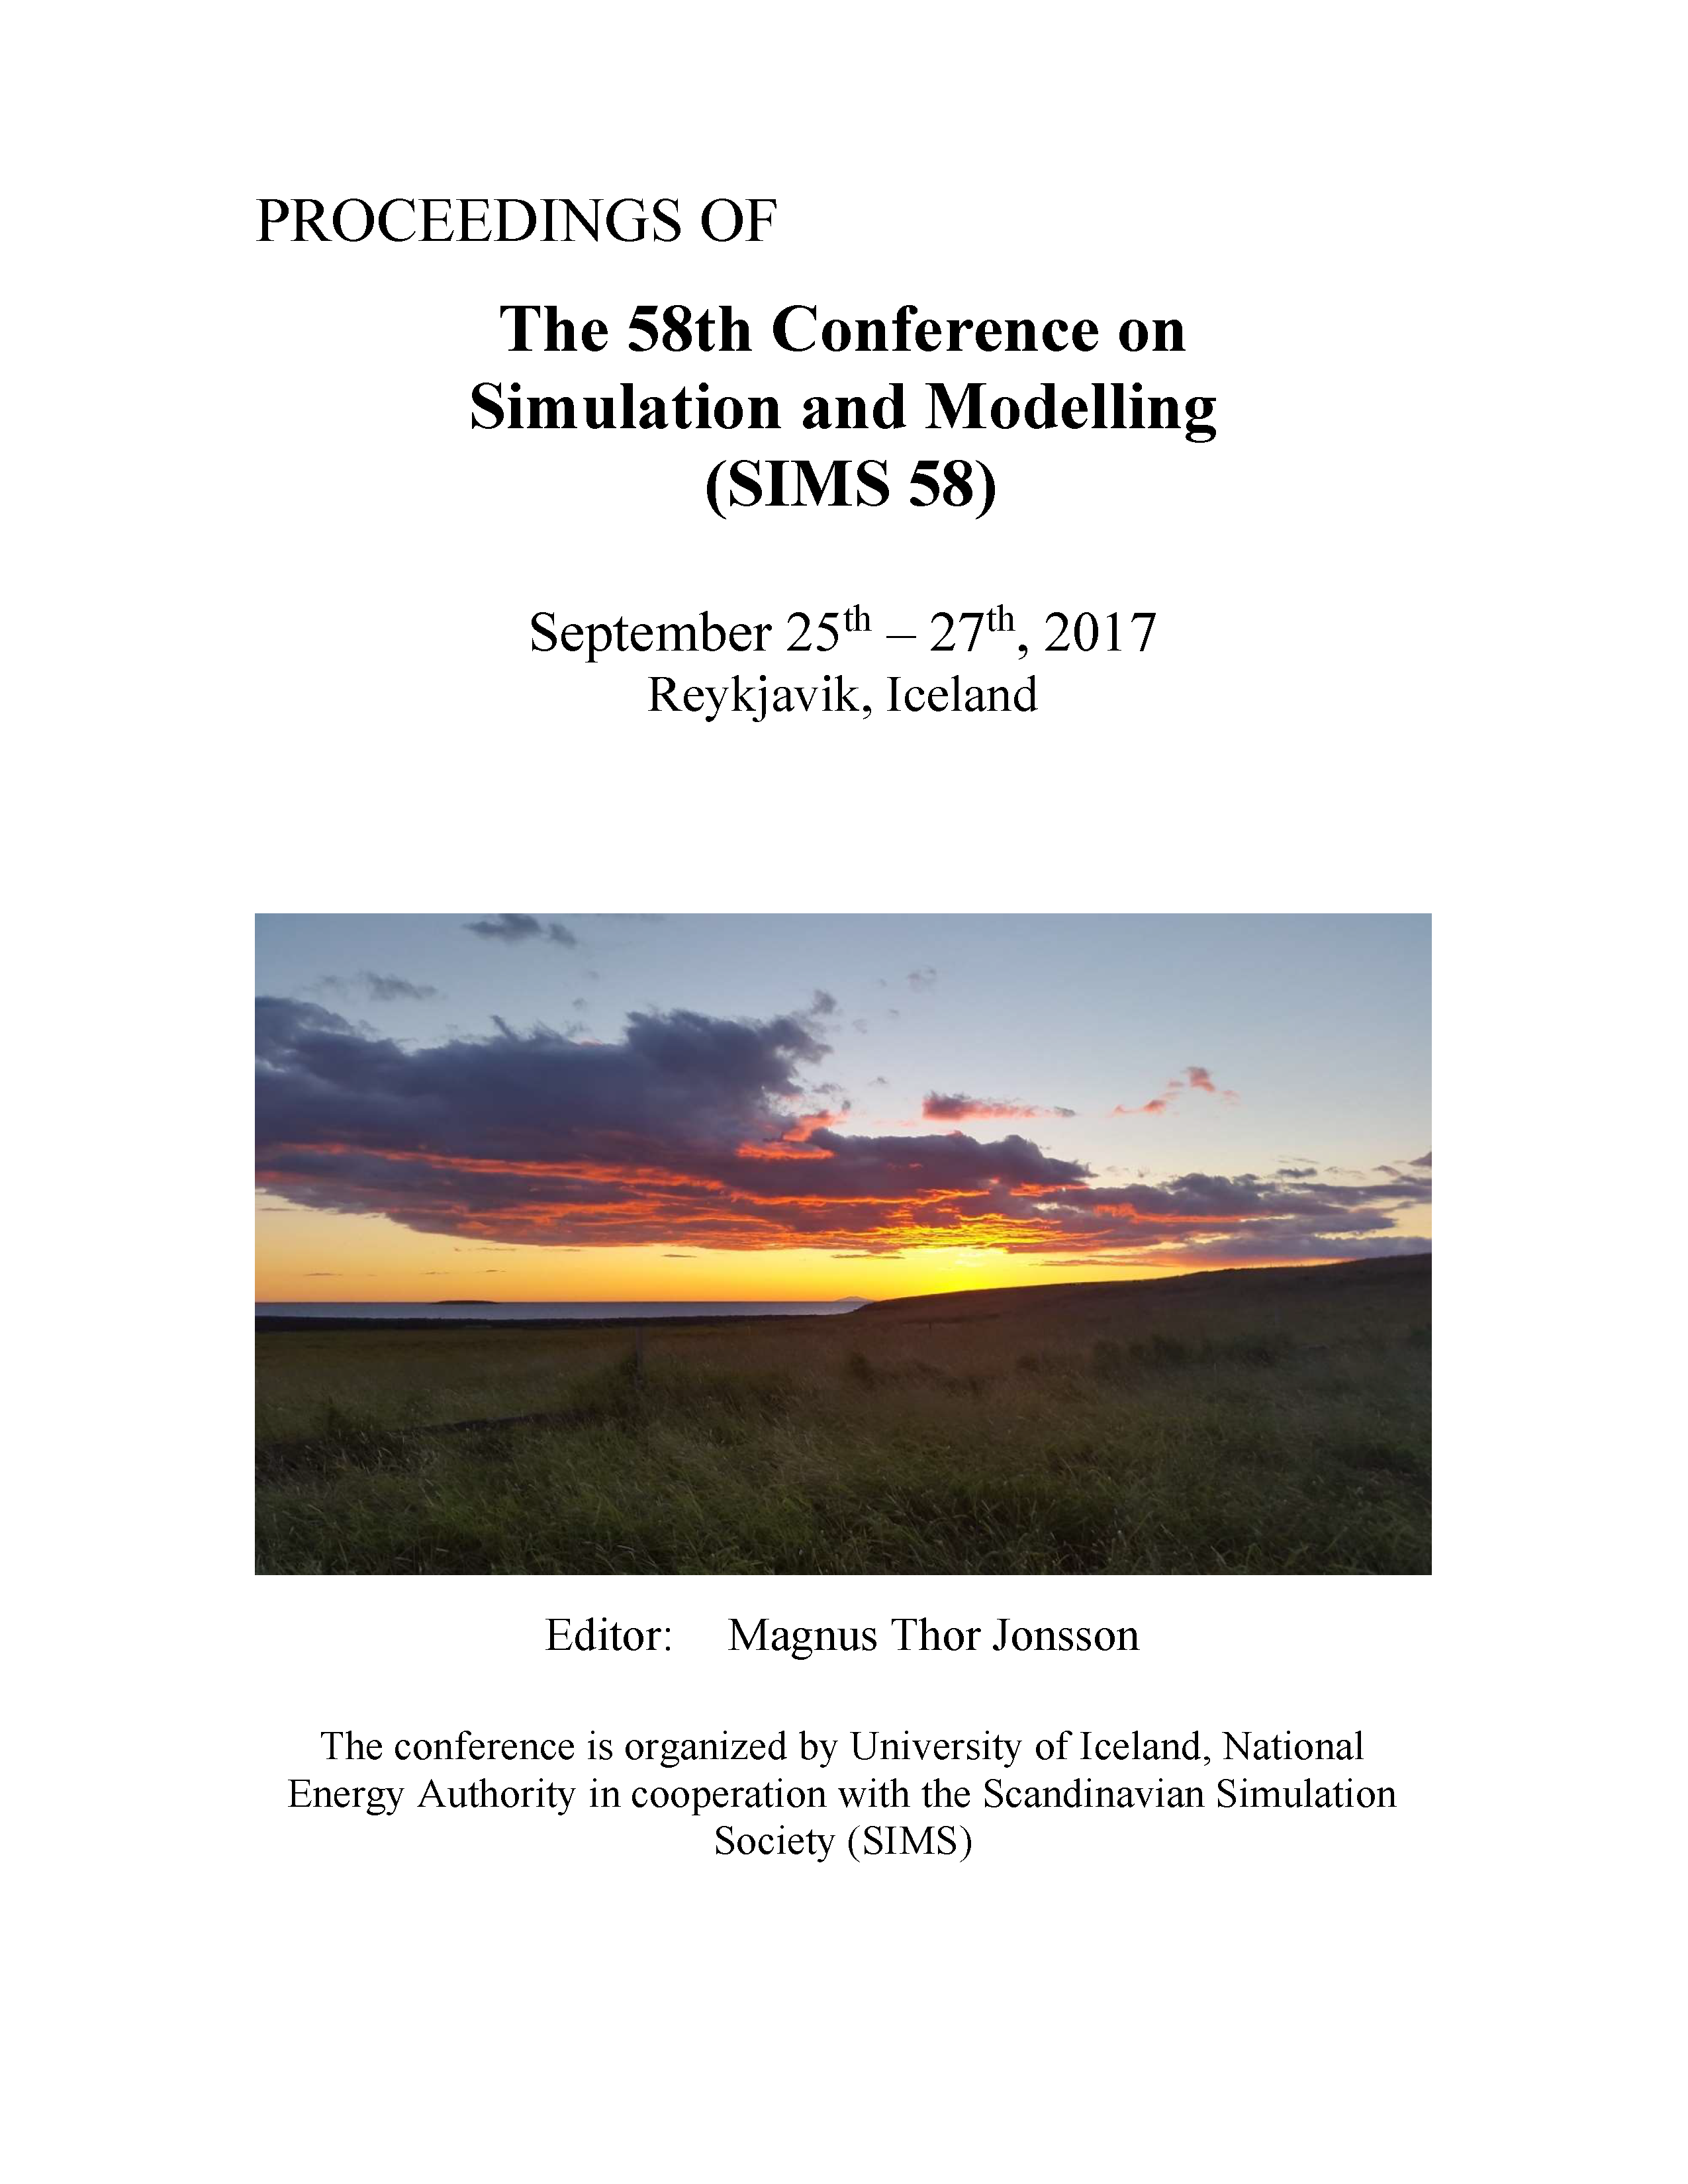 					View Proceedings of the 58th Conference on Simulation and Modelling (SIMS 58) Reykjavik, Iceland, September 25th – 27th, 2017
				